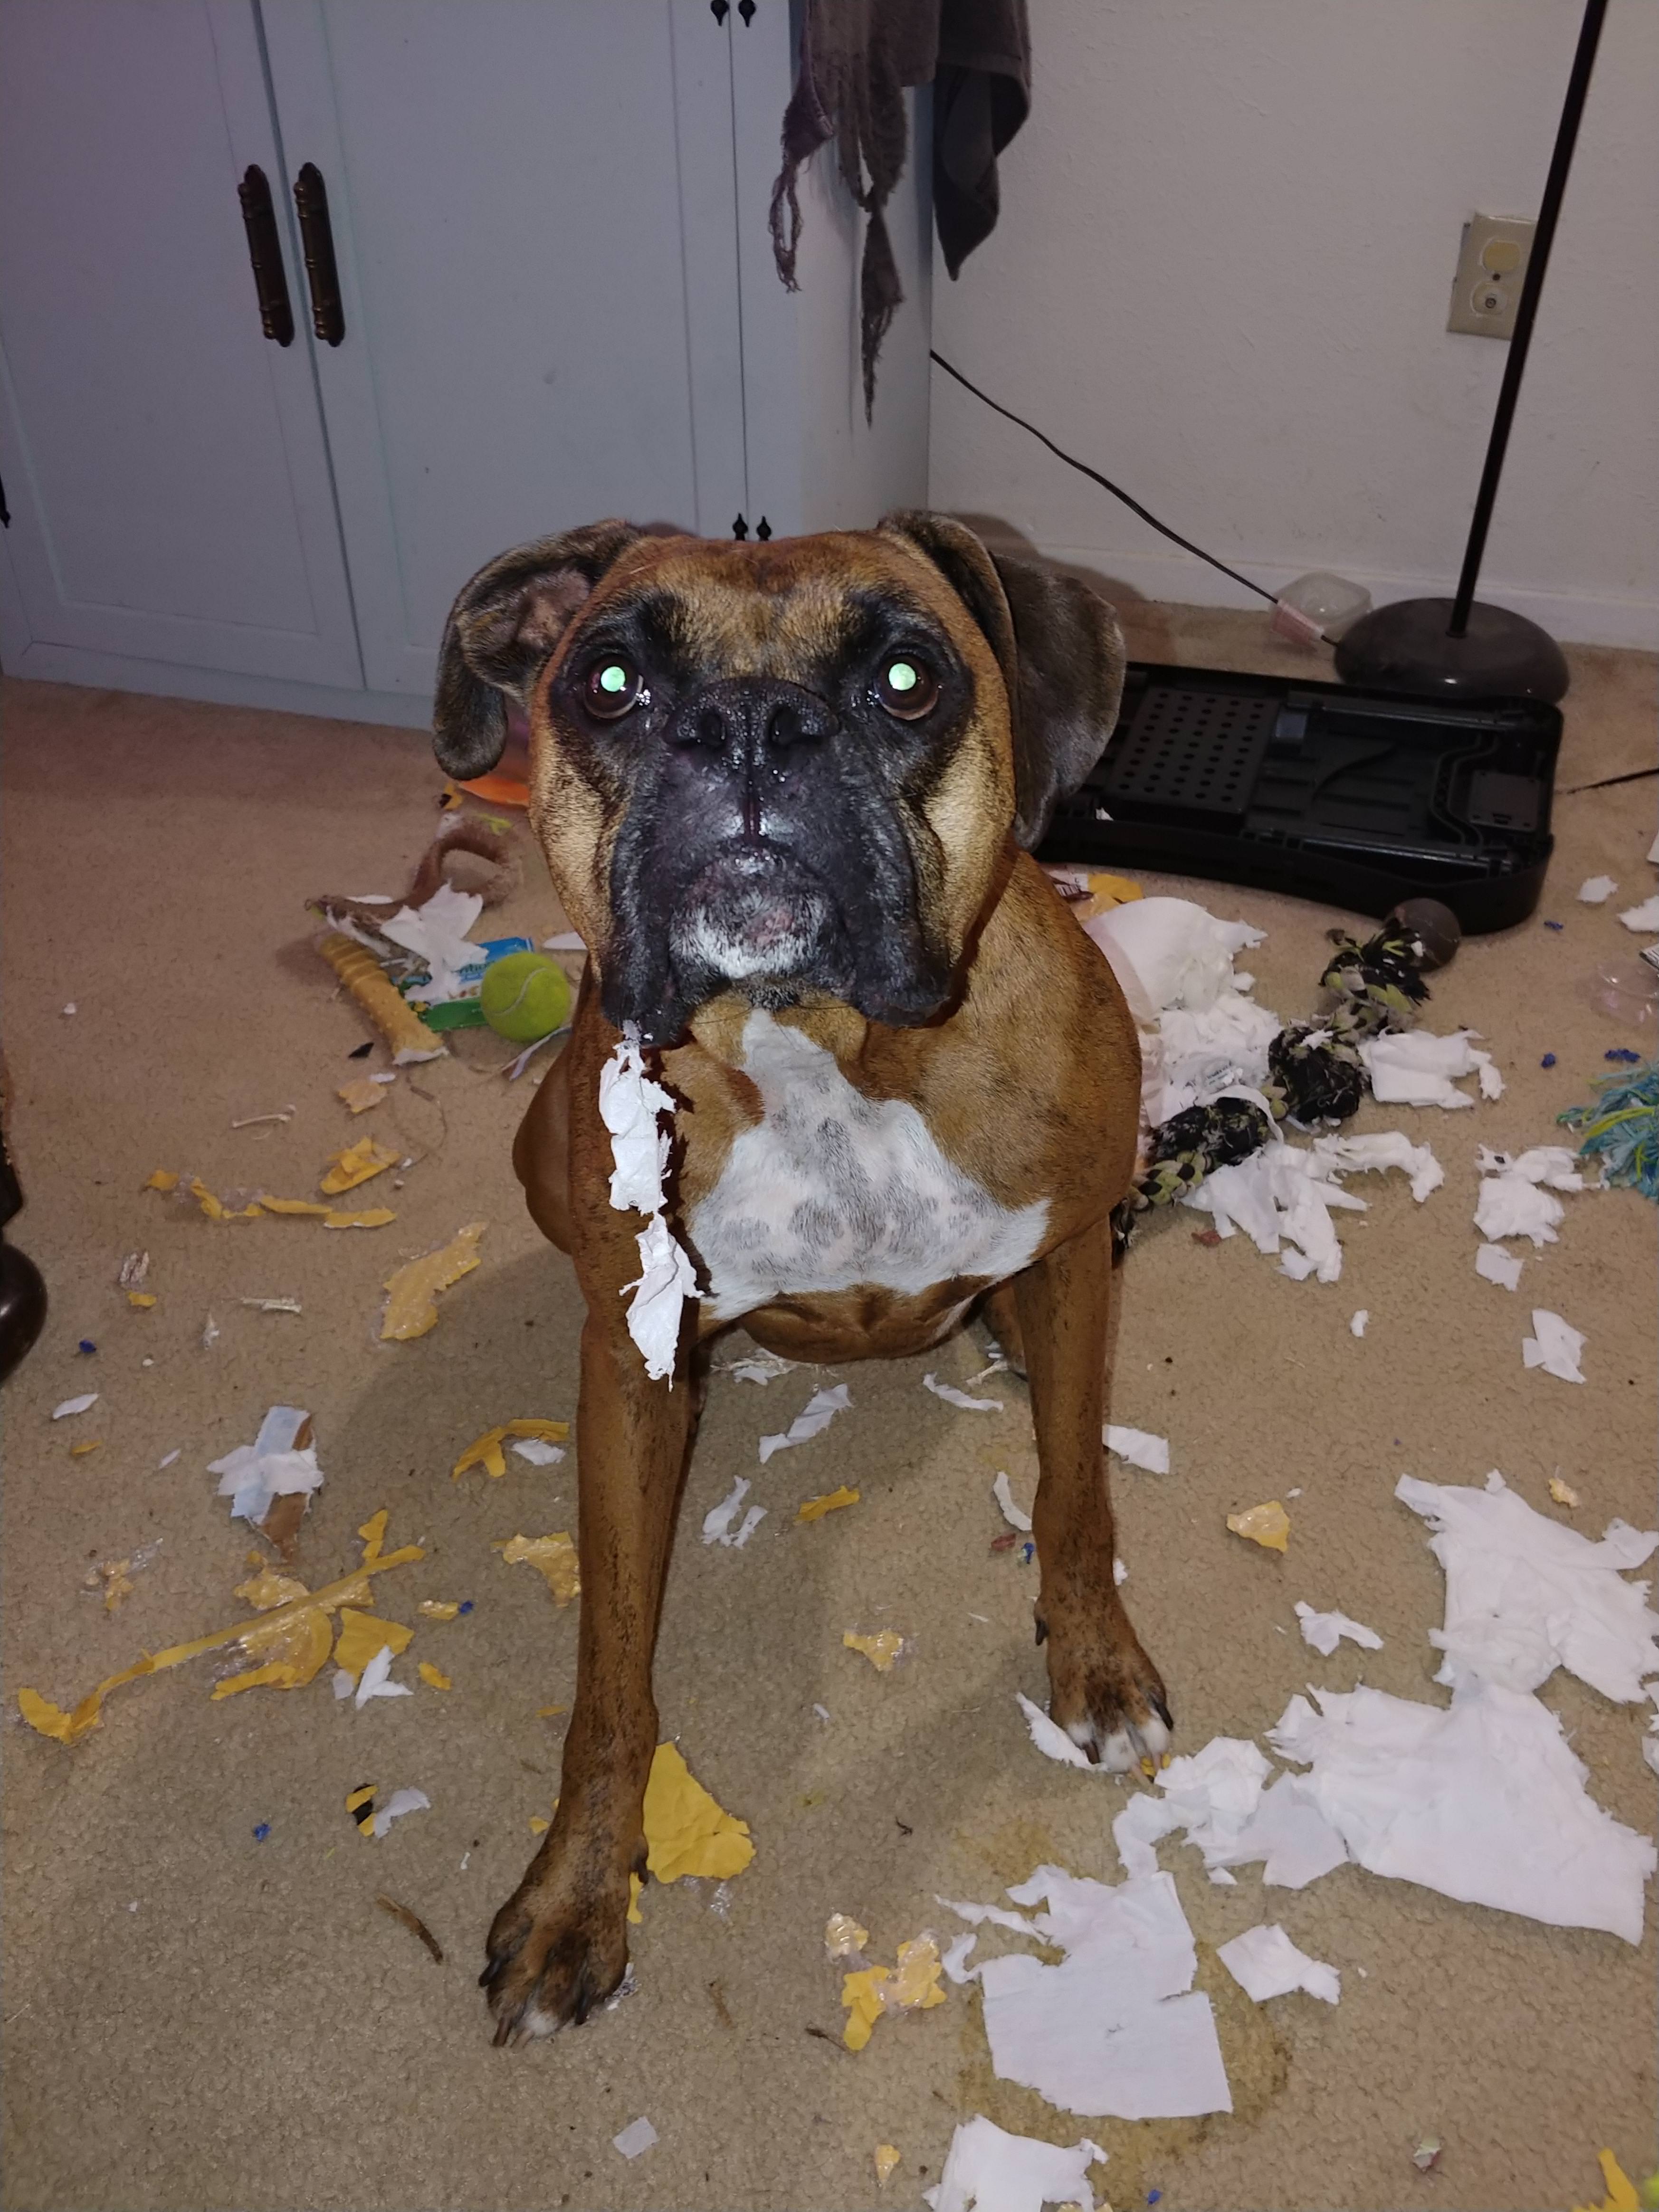 Boxer Dog with torn tissue paper in its mouth and all over the floor